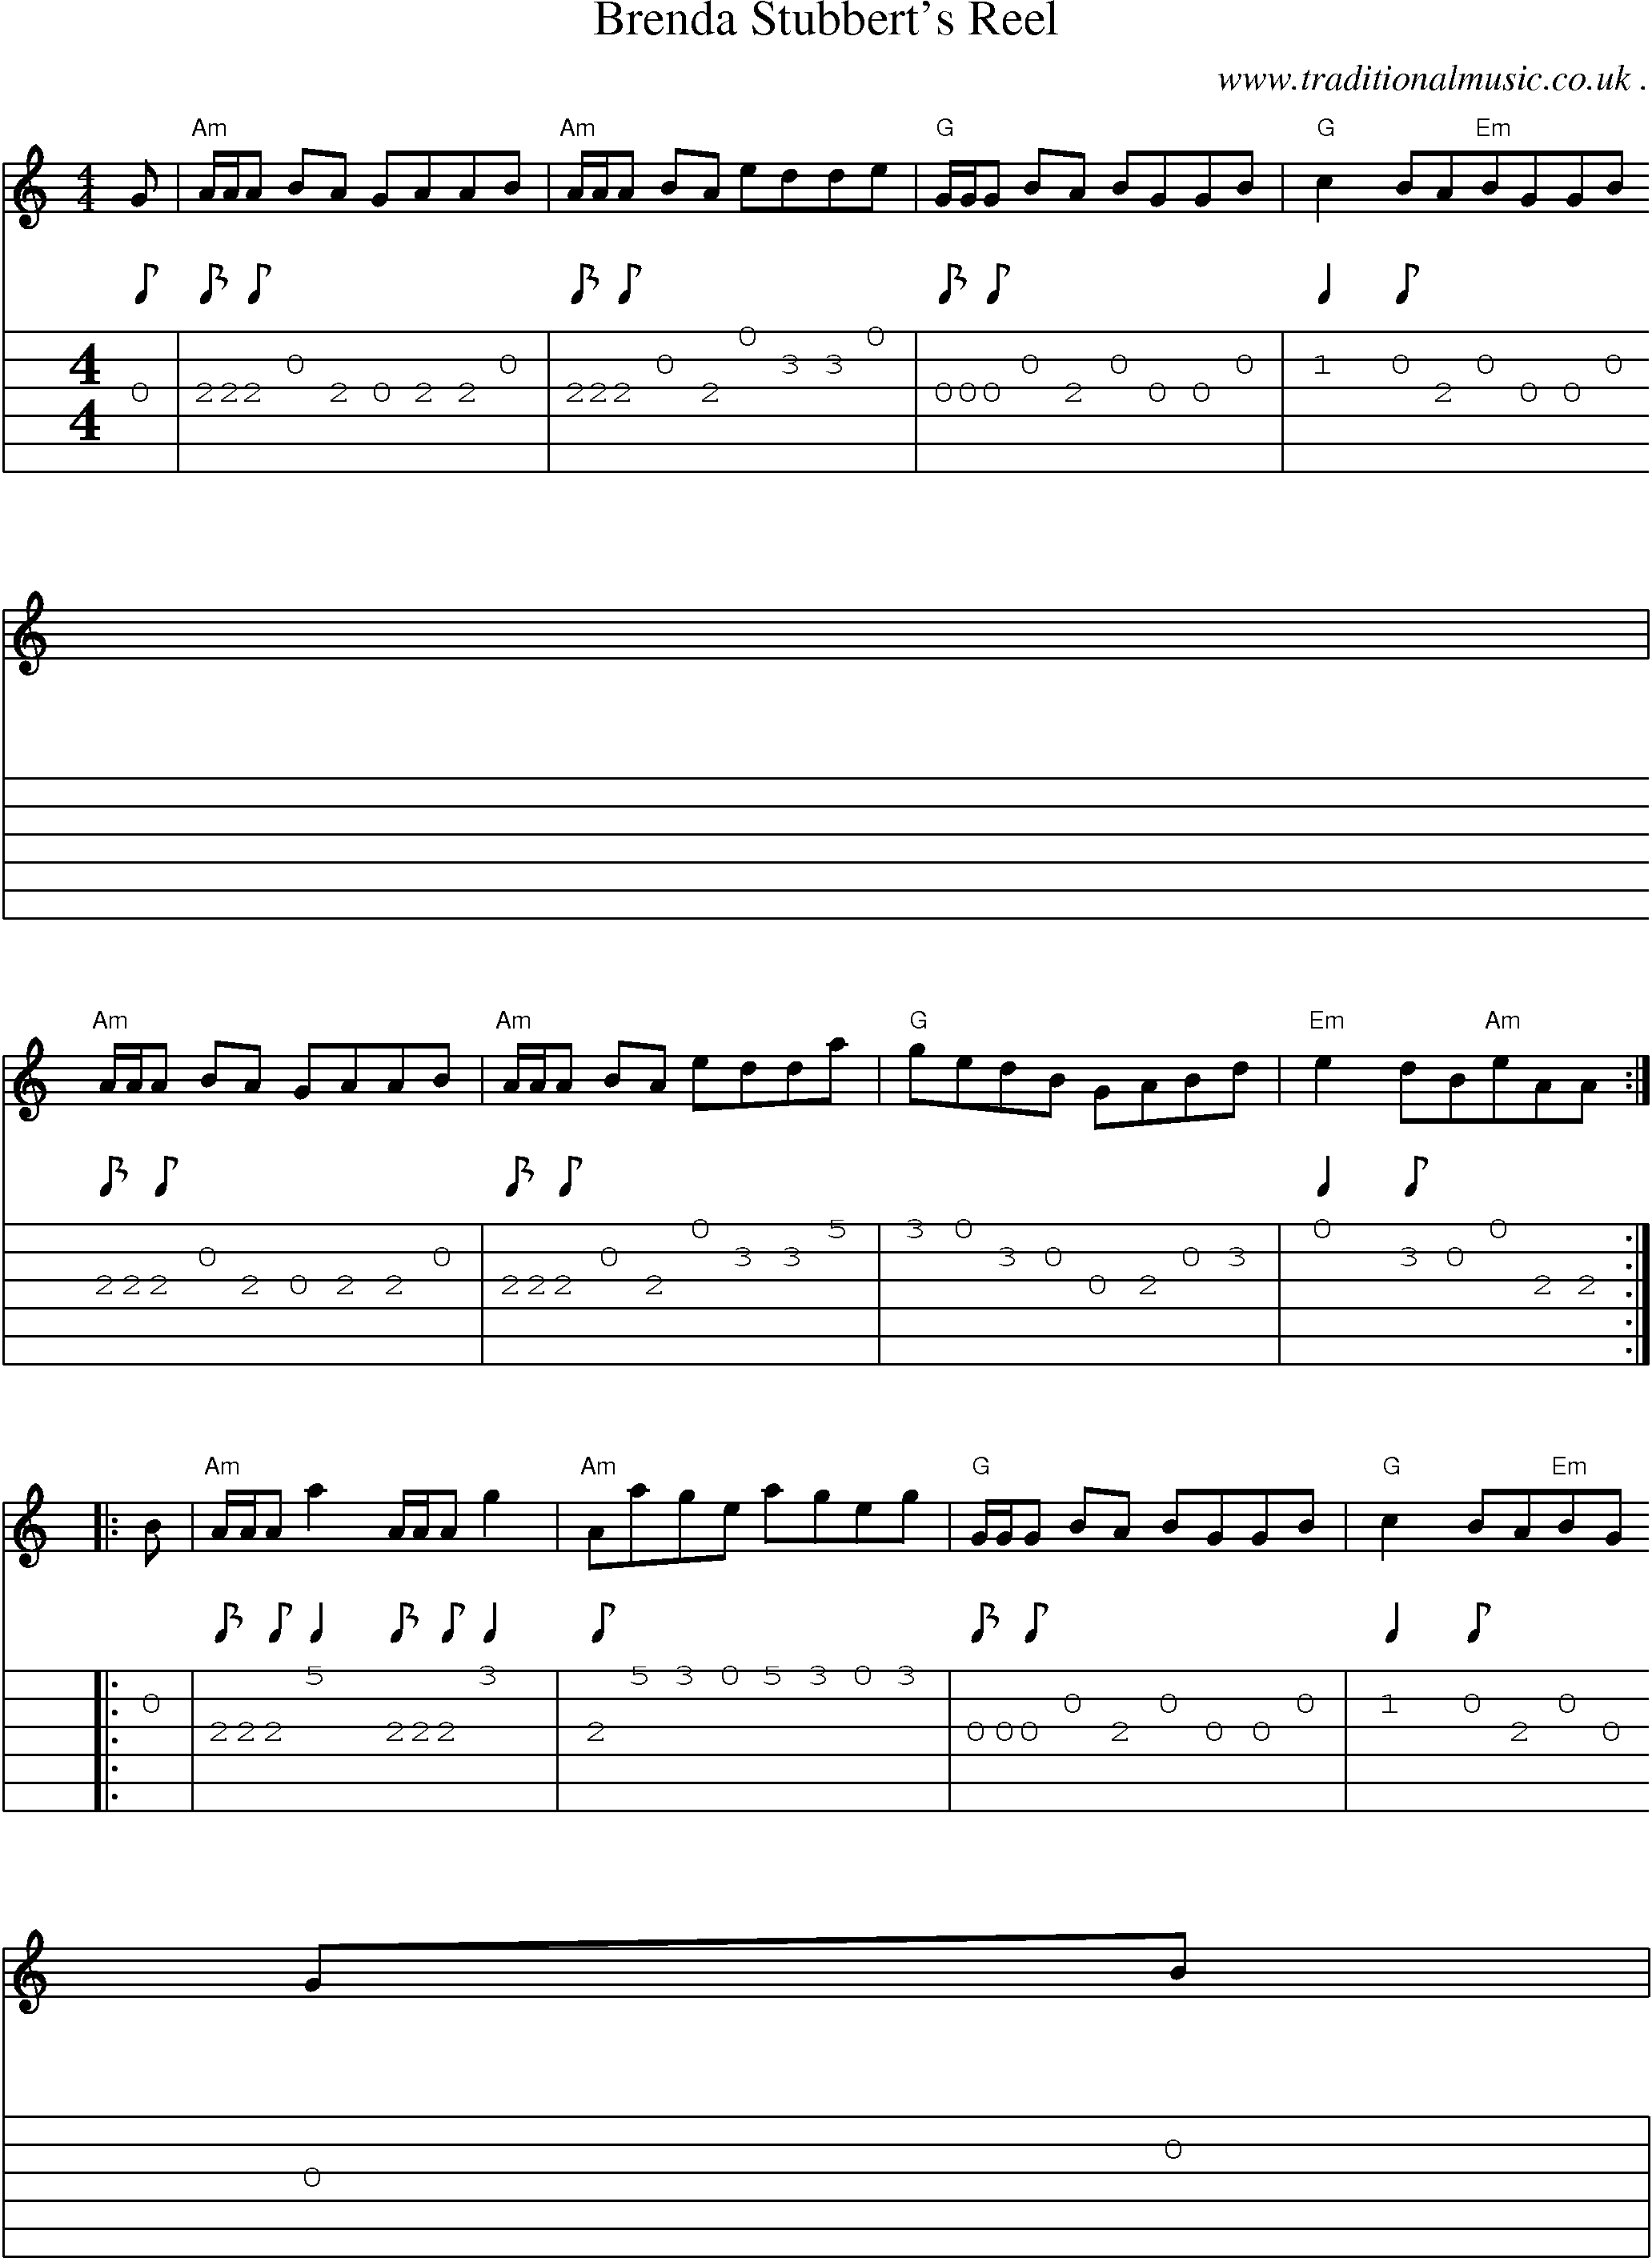 Sheet-Music and Guitar Tabs for Brenda Stubberts Reel